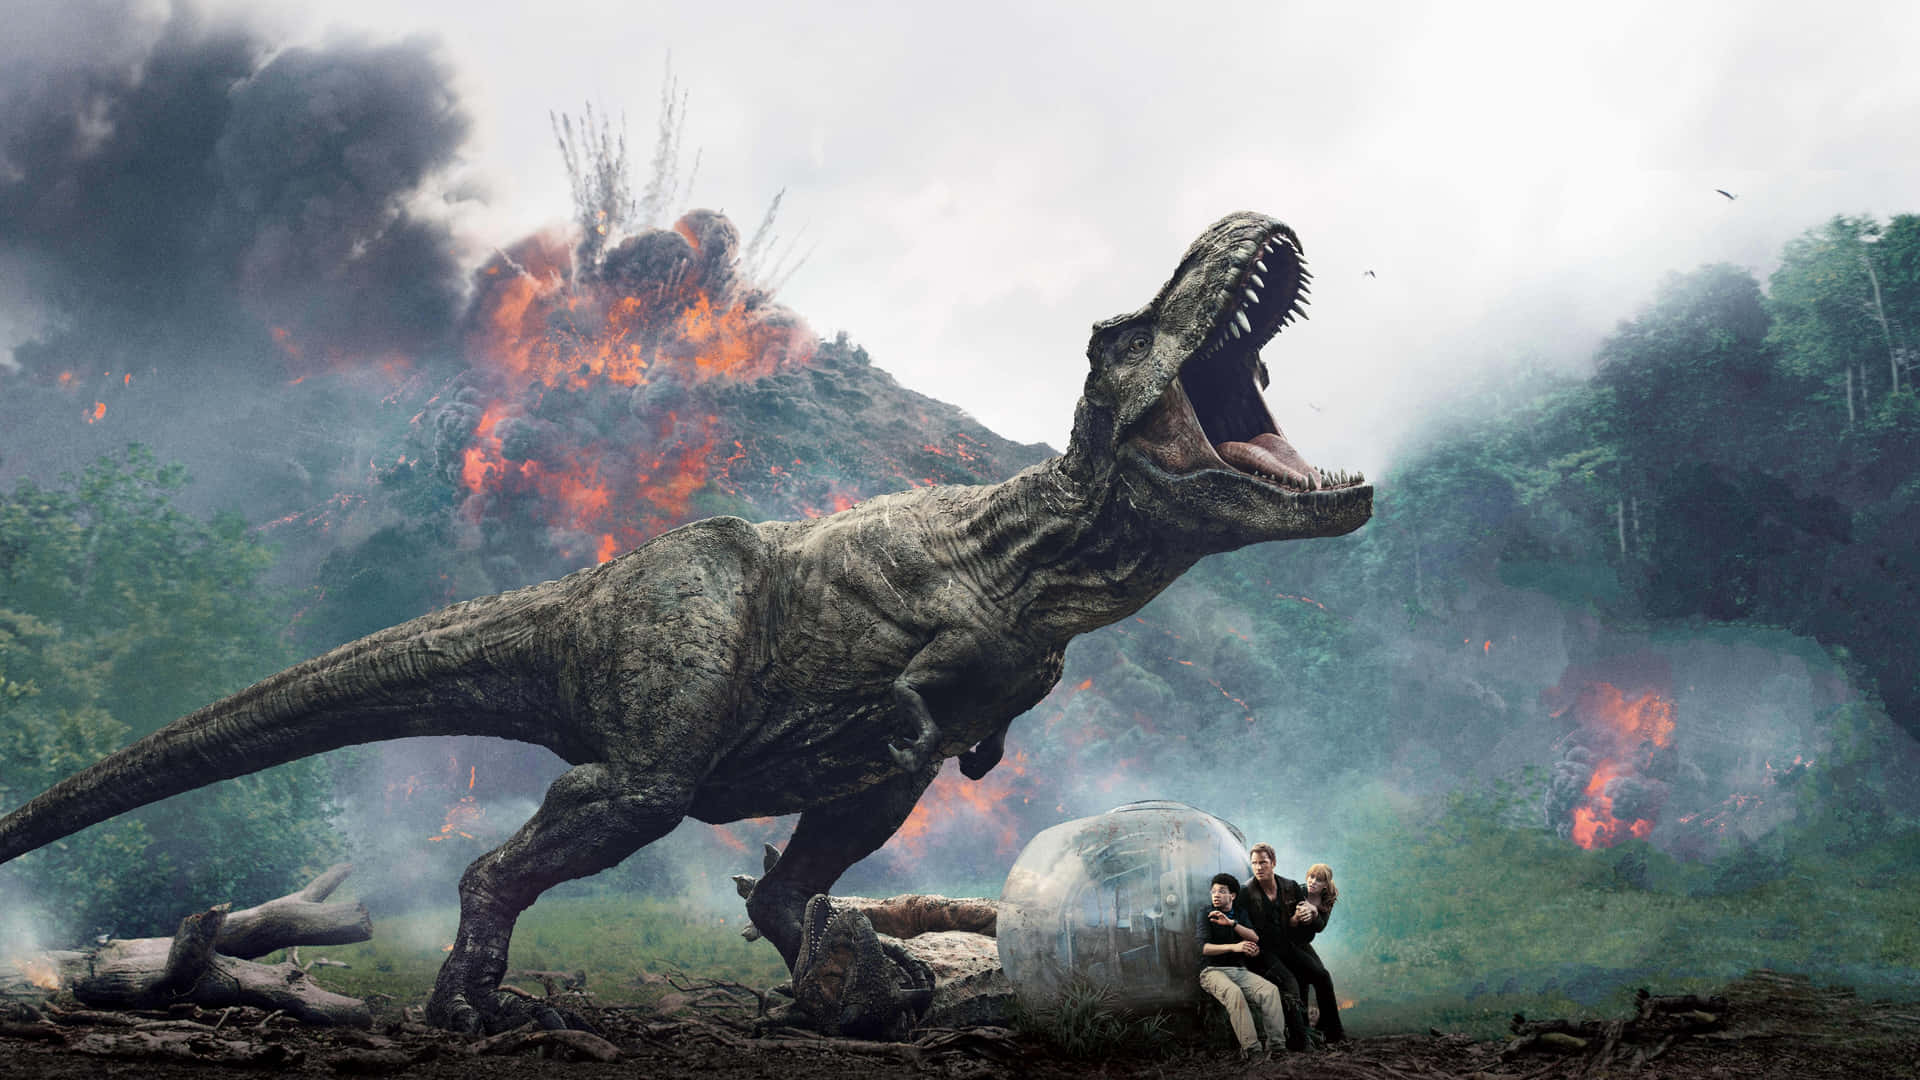 Jurassic World Images – Browse 7,367 Stock Photos, Vectors, and Video